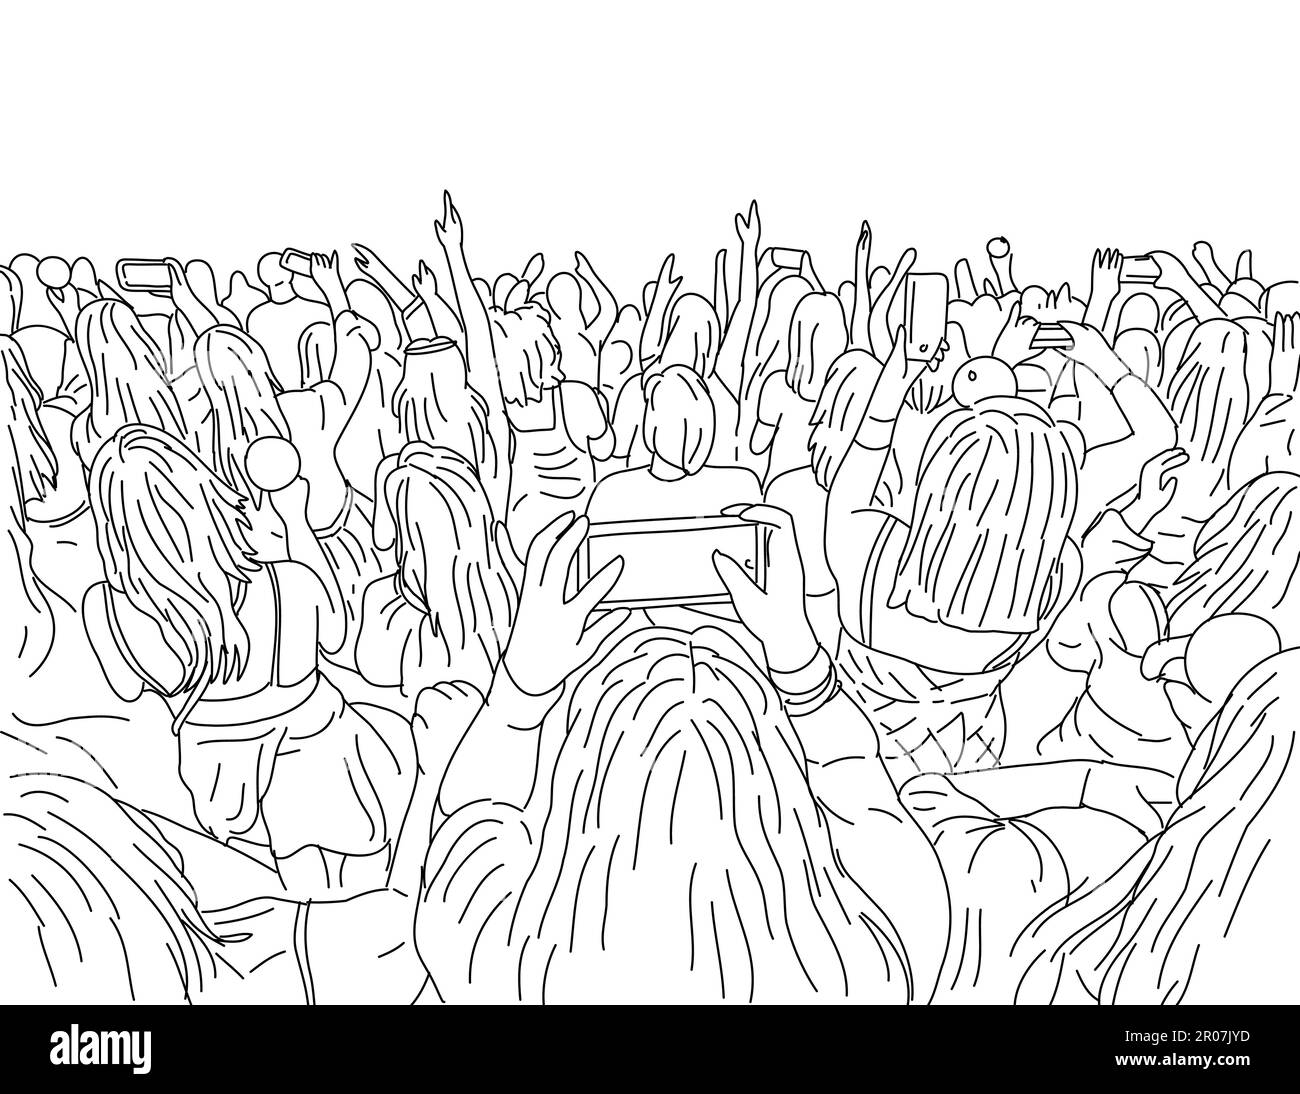 Line art drawing illustration of a large crowd of young people with cellphone or mobile phone at a live concert music monoline style. Stock Photo